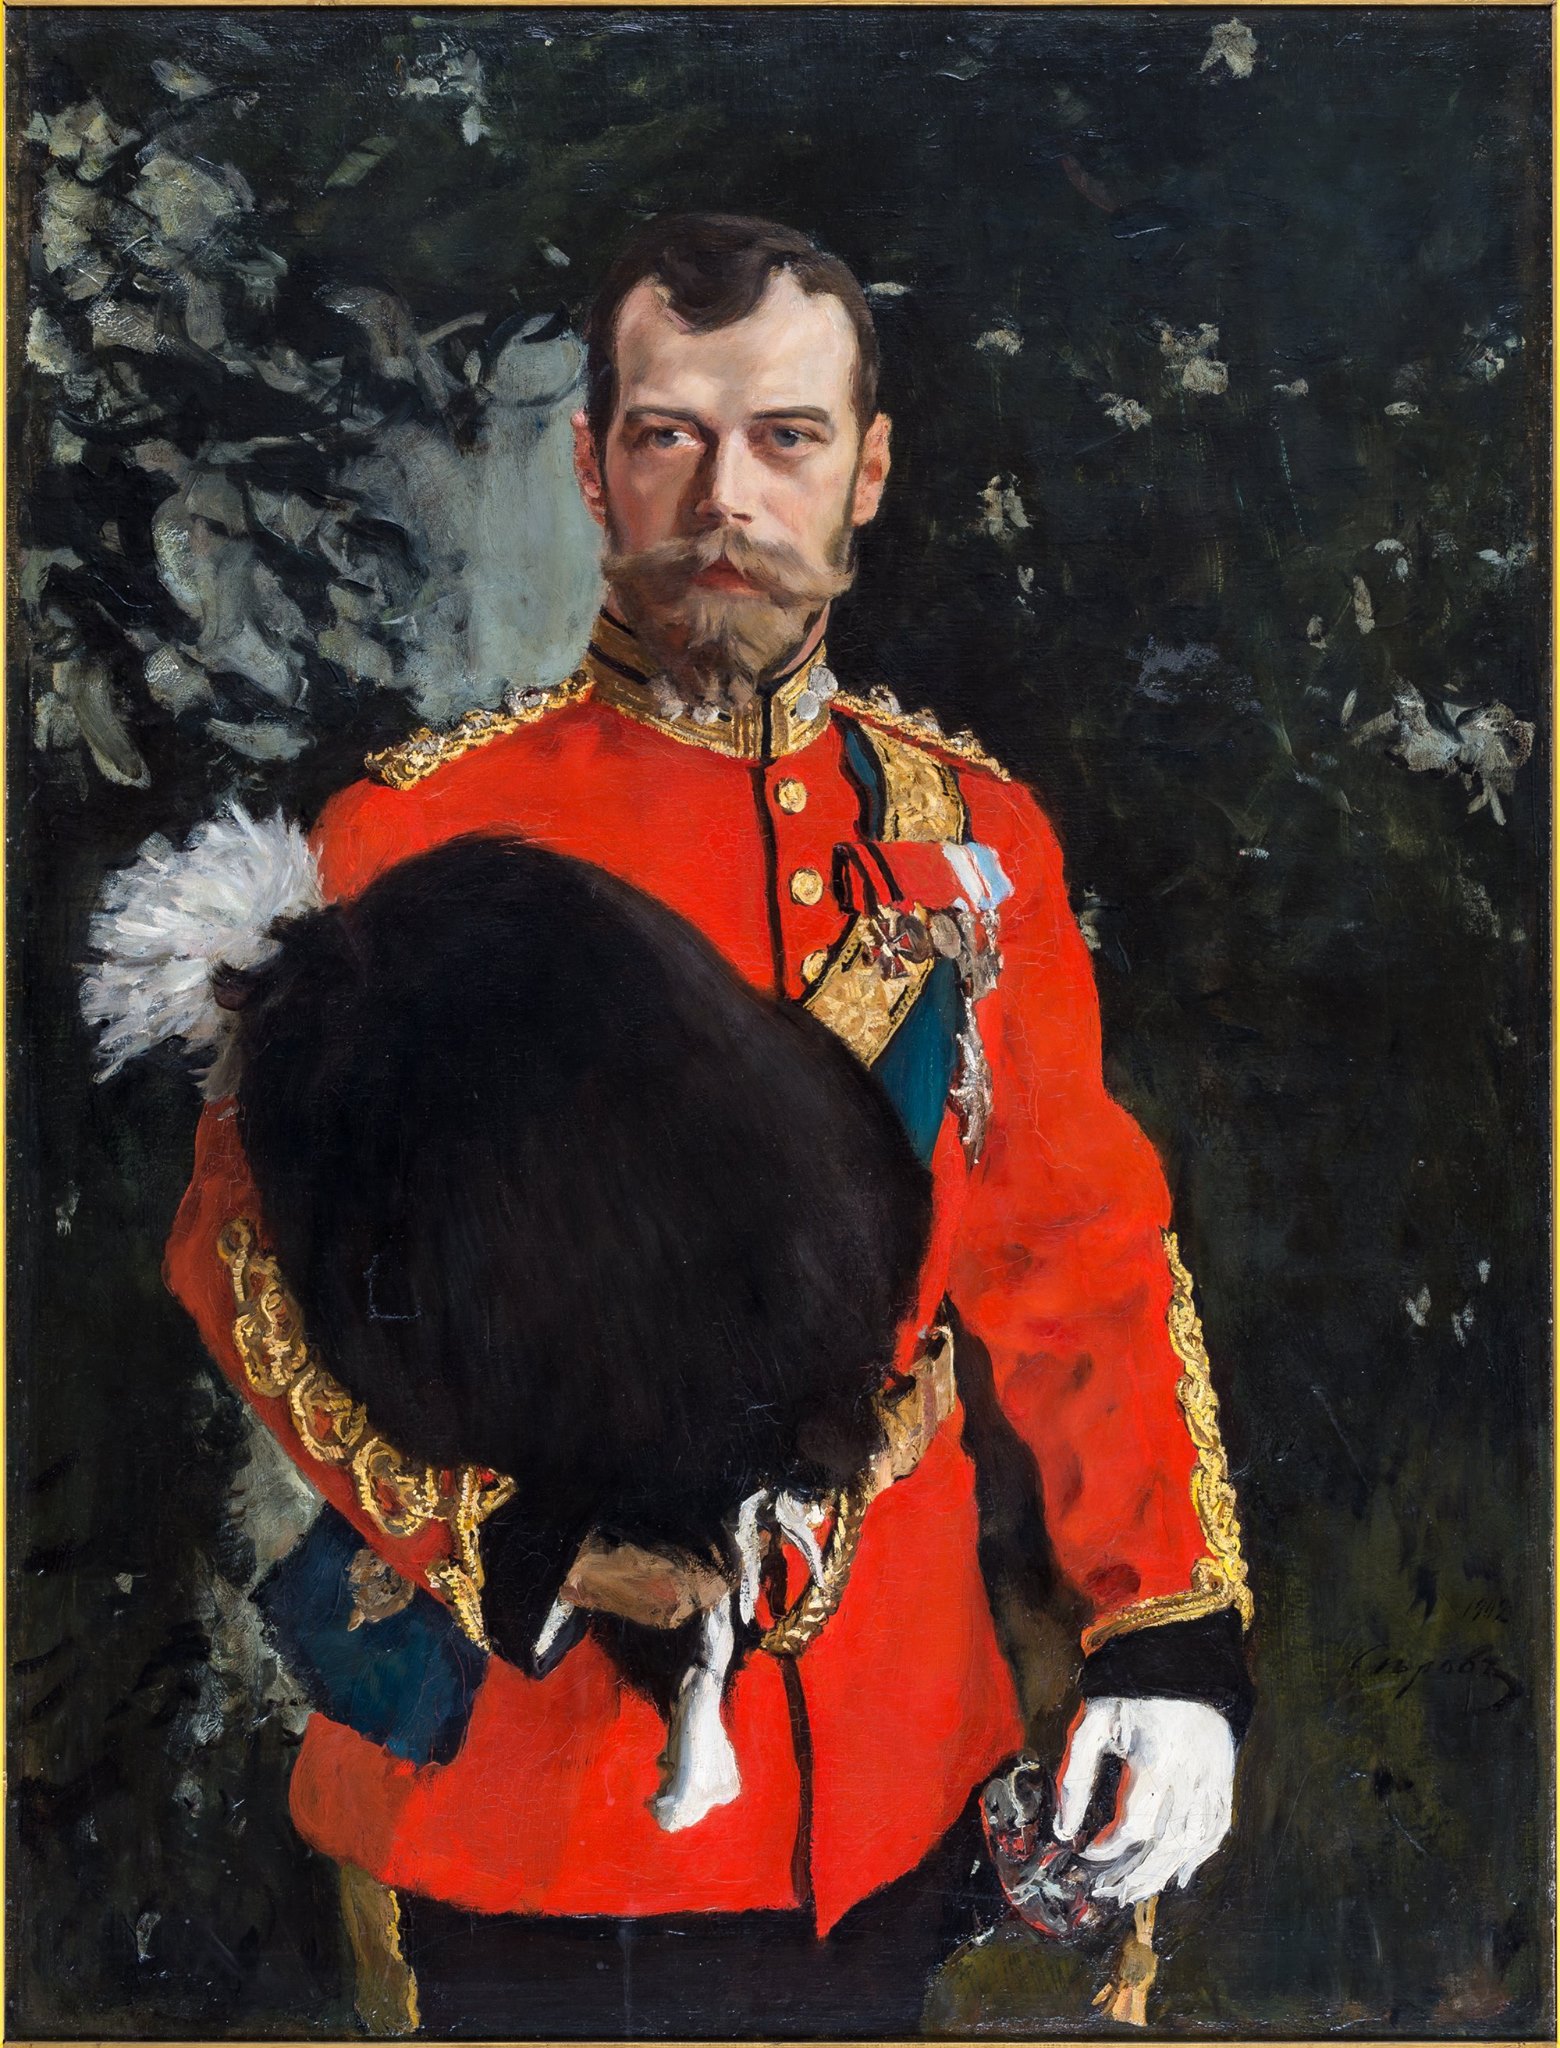 The famous Russian painter Valentin Serov portrayed the Russian tsar wearing his red Royal Scots Greys Colonel-in-Chief uniform. The portrait is now displayed as one of the highlights of the regiment’s museum in Edinburgh. To this day Tsar Nicholas II is commemorated by the Royal Scots Dragoon Guards (which the Royal Scots Greys became in 1971), by the playing of the Russian Imperial anthem at certain mess functions. https://www.scotsdgmuseum.com/treasures/ // Valentin Serov. His Imperial Majesty Tsar Nicholas II of Russia, as Colonel-in-Chief, 2nd Dragoons (The Royal Scots Greys). The painting is held in The Royal Scots Dragoon Guards Regimental Museum.